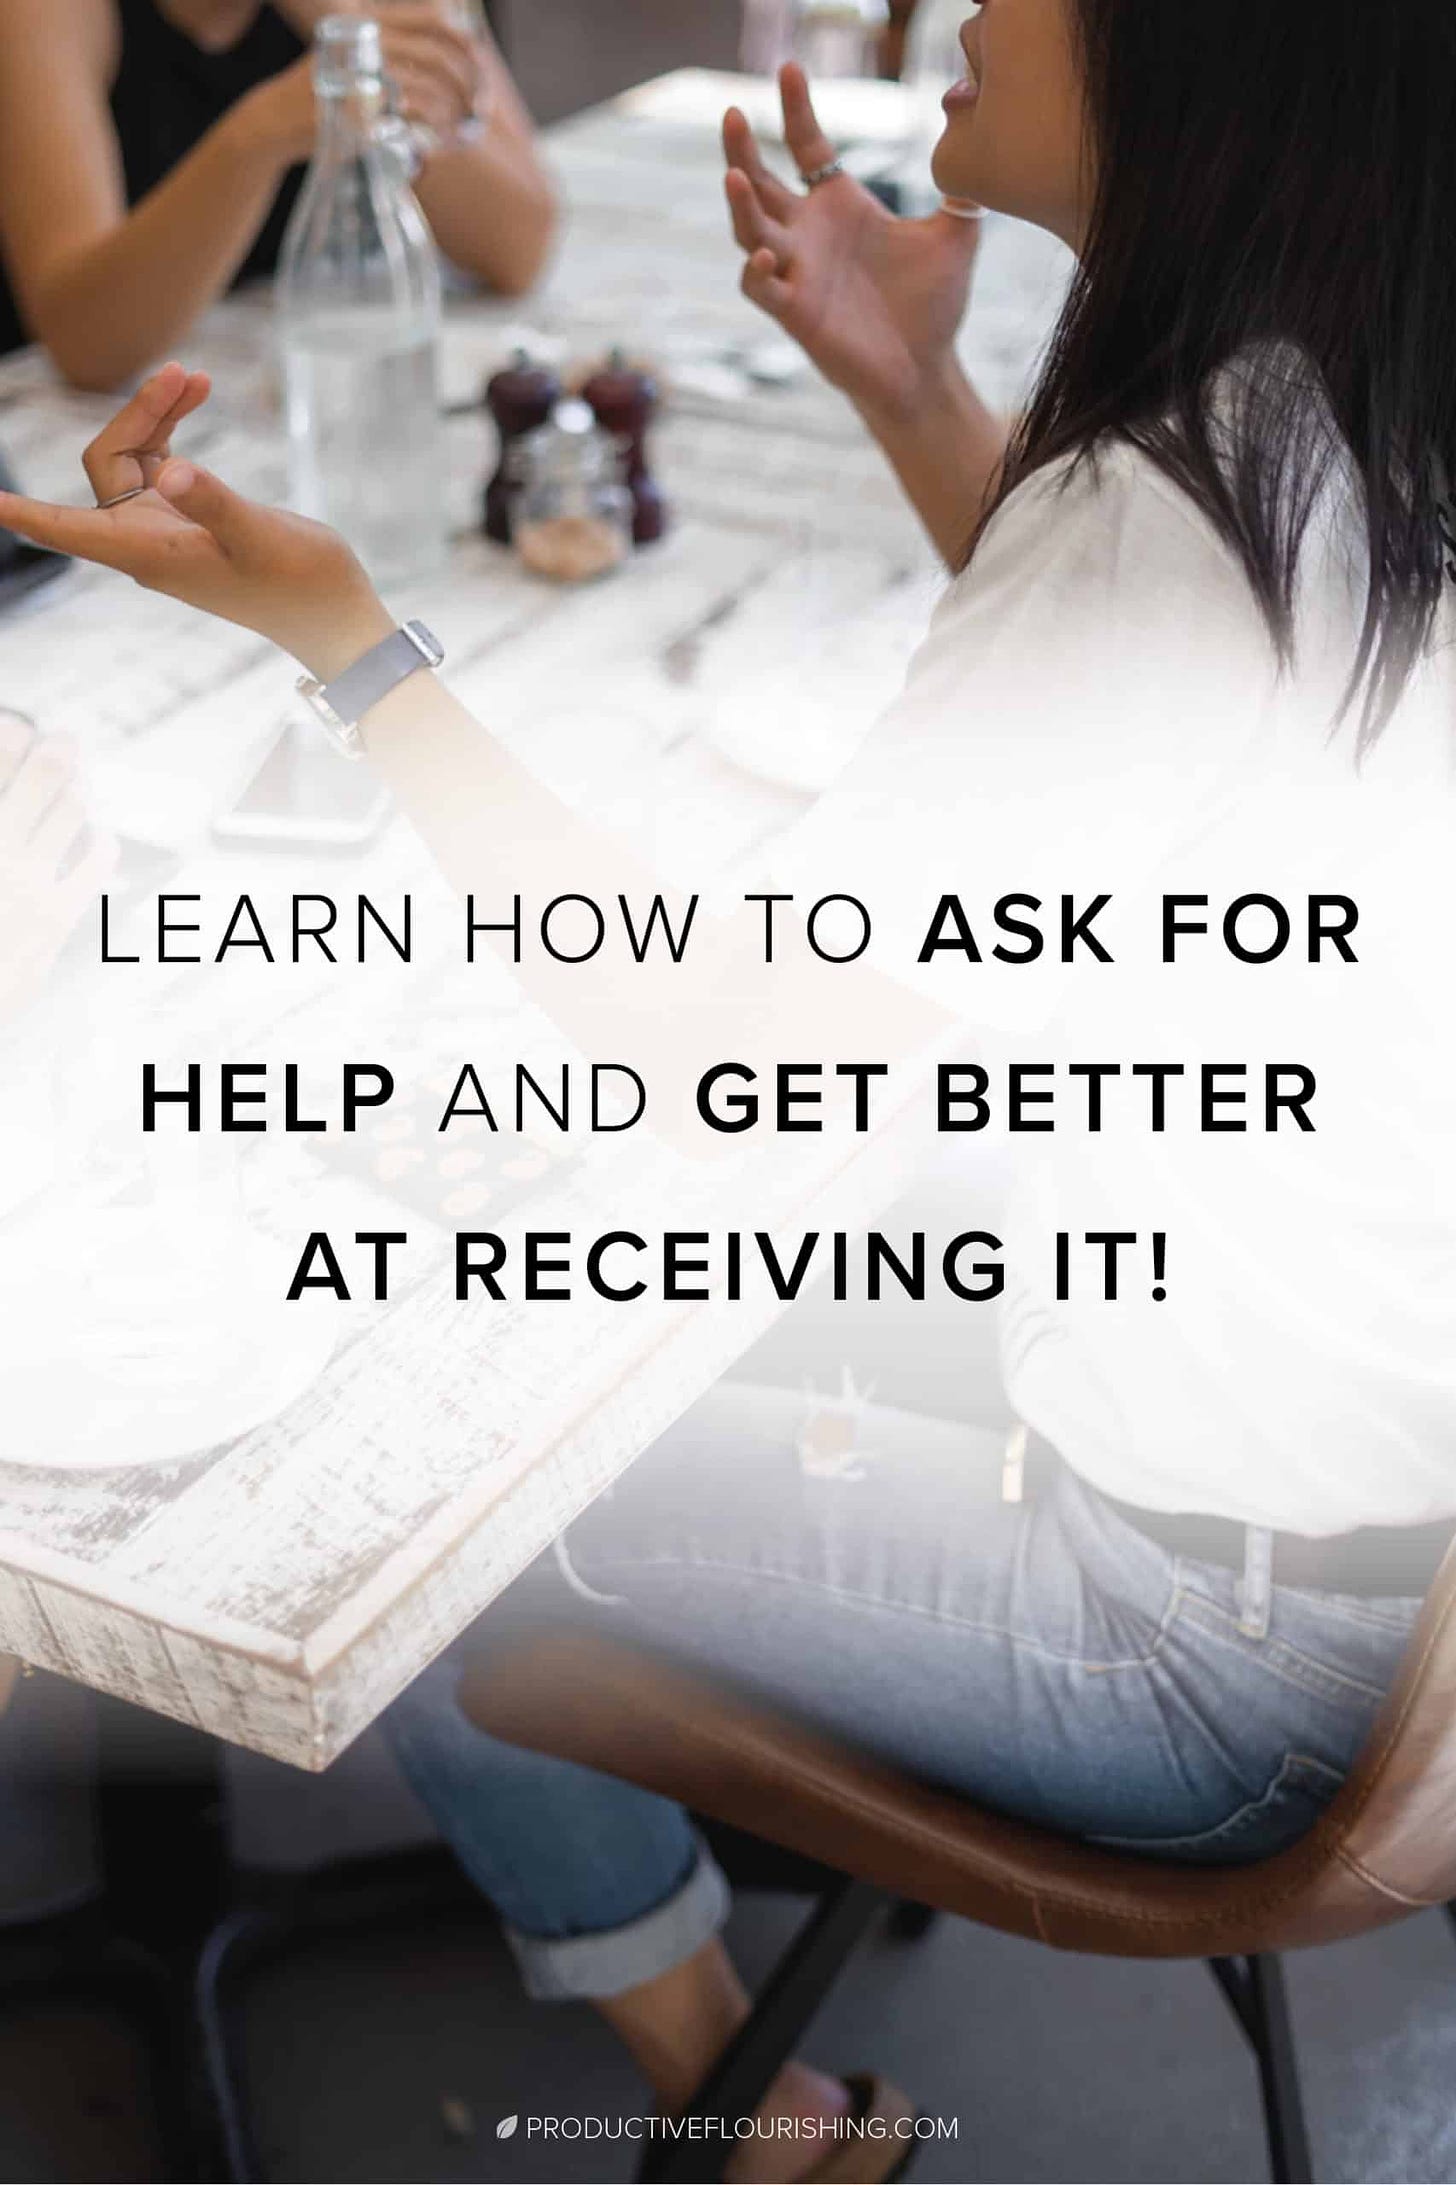 Learn How To Ask For Help and Get Better at Receiving It. Here are three ways I am learning to ask for and receive help. I used to suck at receiving help. What habits can you build to ask for and receive the help — that’s freely given in a relational exchange rather than a transaction — you need? #askingforhelp #selfimprovement #productiveflourishing